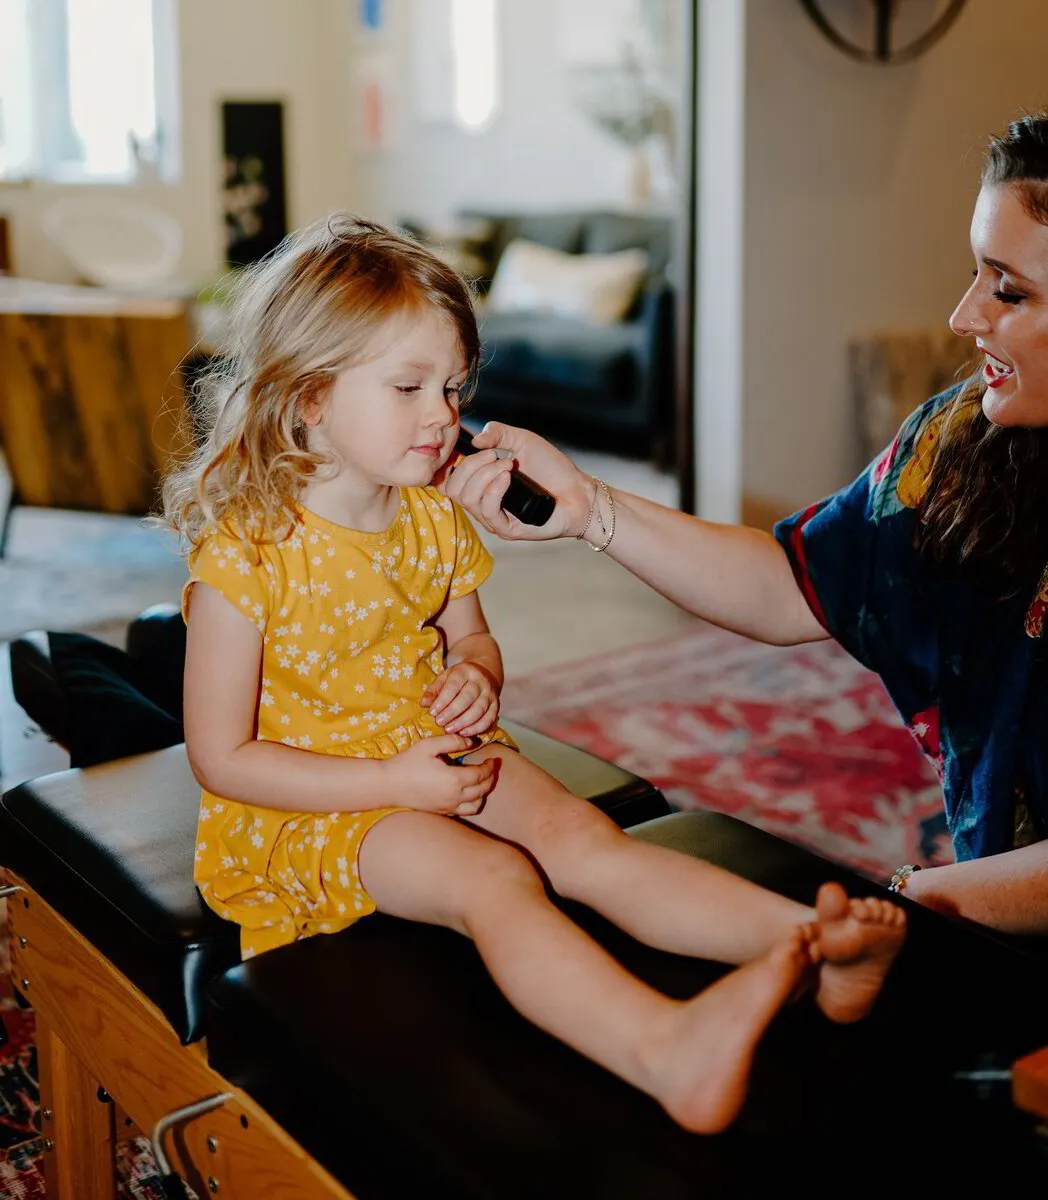  Dr. Morgan engages gently with a young child, using her expertise in pediatric chiropractic